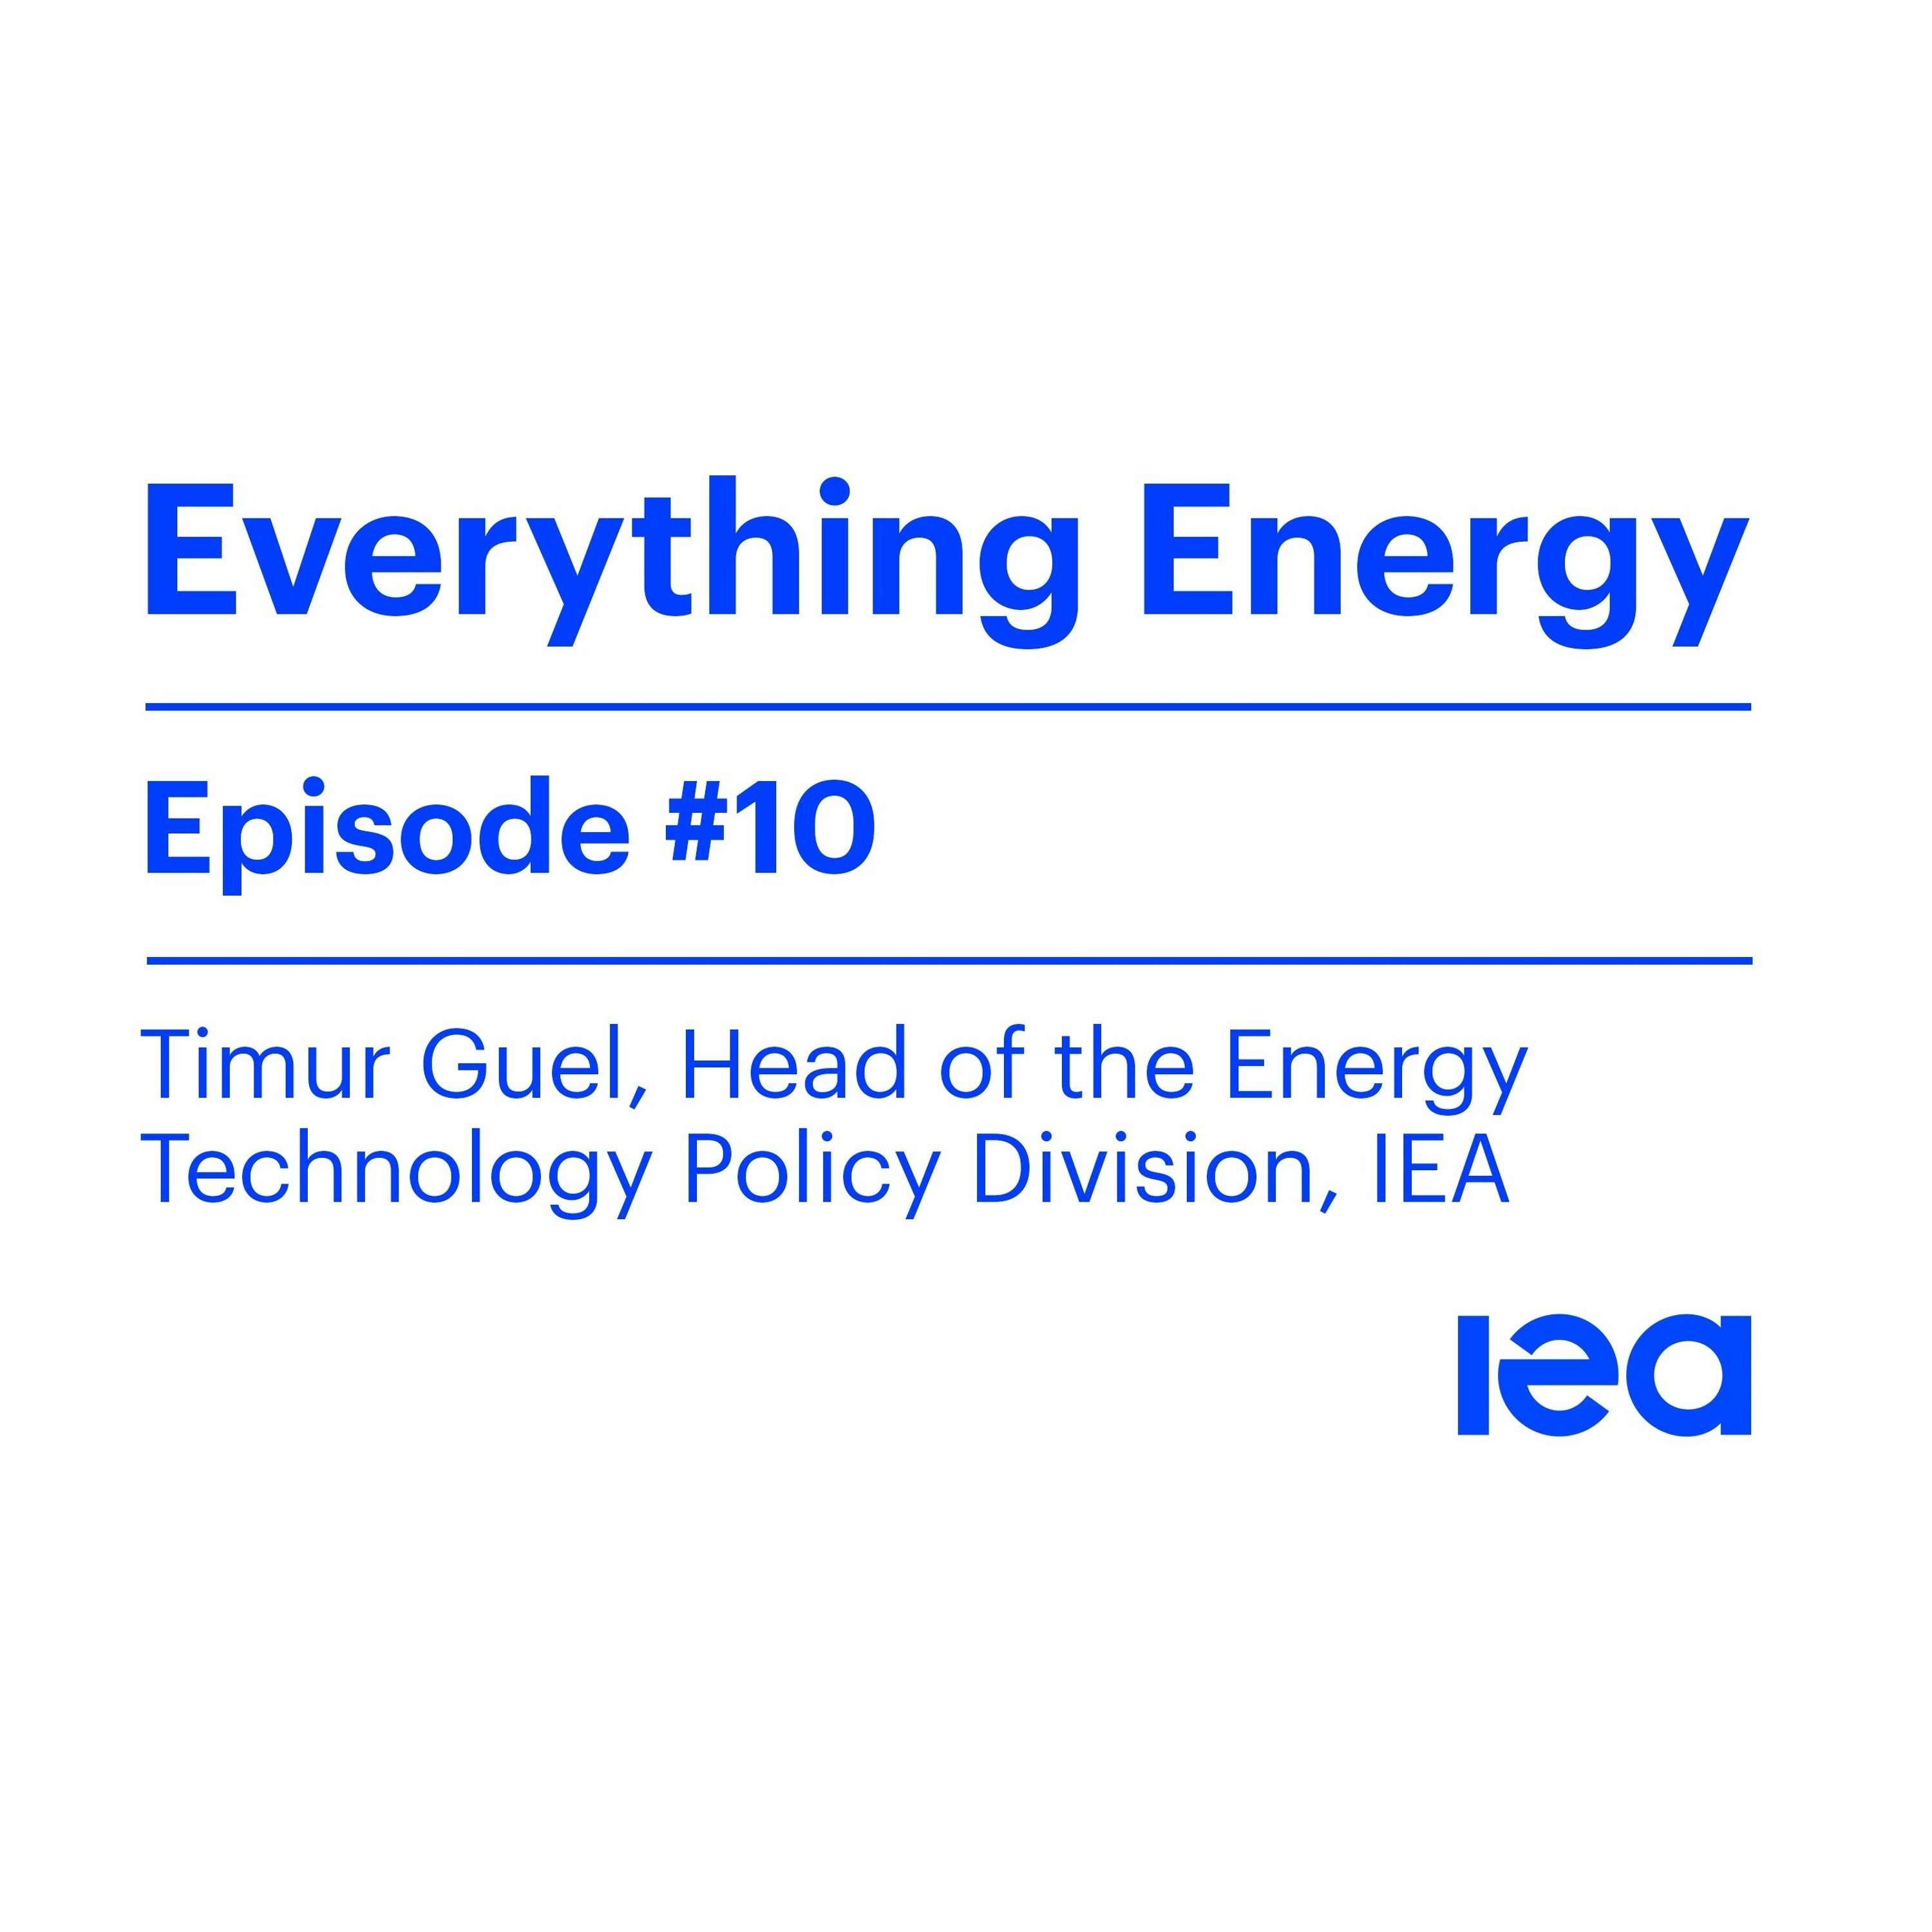 Episode 10: Technology, innovation and clean energy transitions